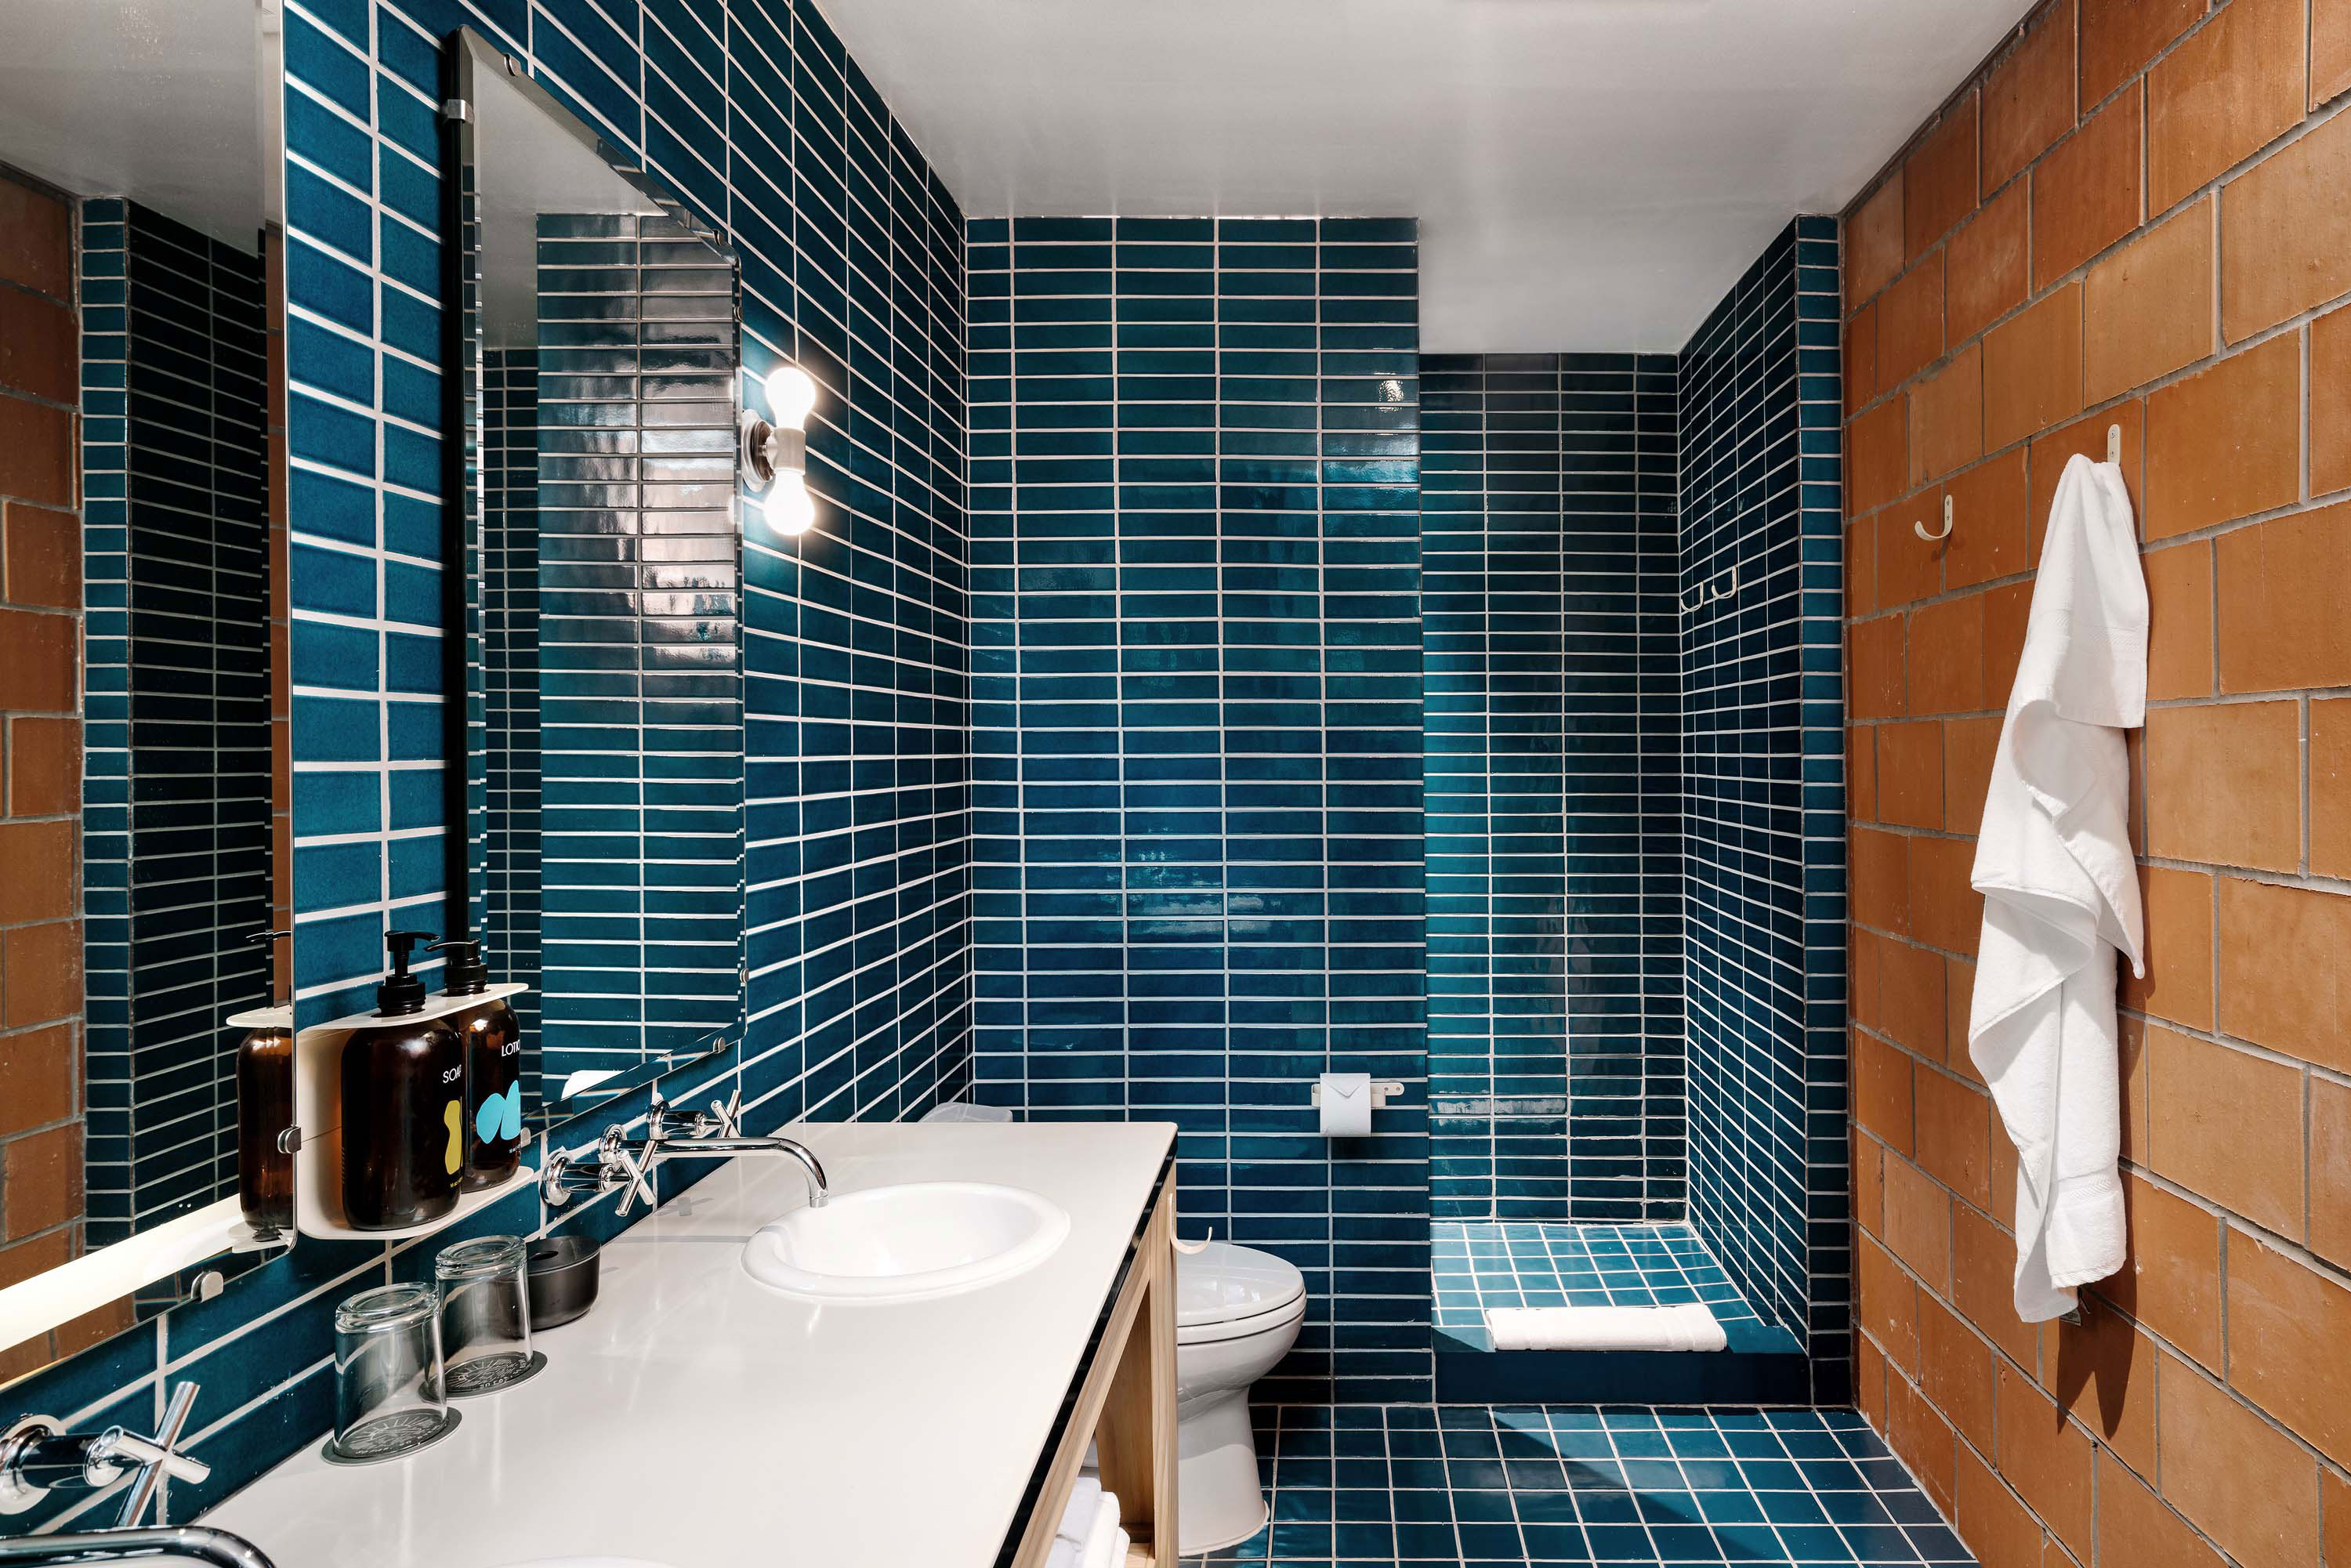 Interior photo of the Carpenter Hotel by Specht Novak Architects. Shot by Chase Daniel, featuring a large bathroom vanity with rich blue tiles and brick accent wall.